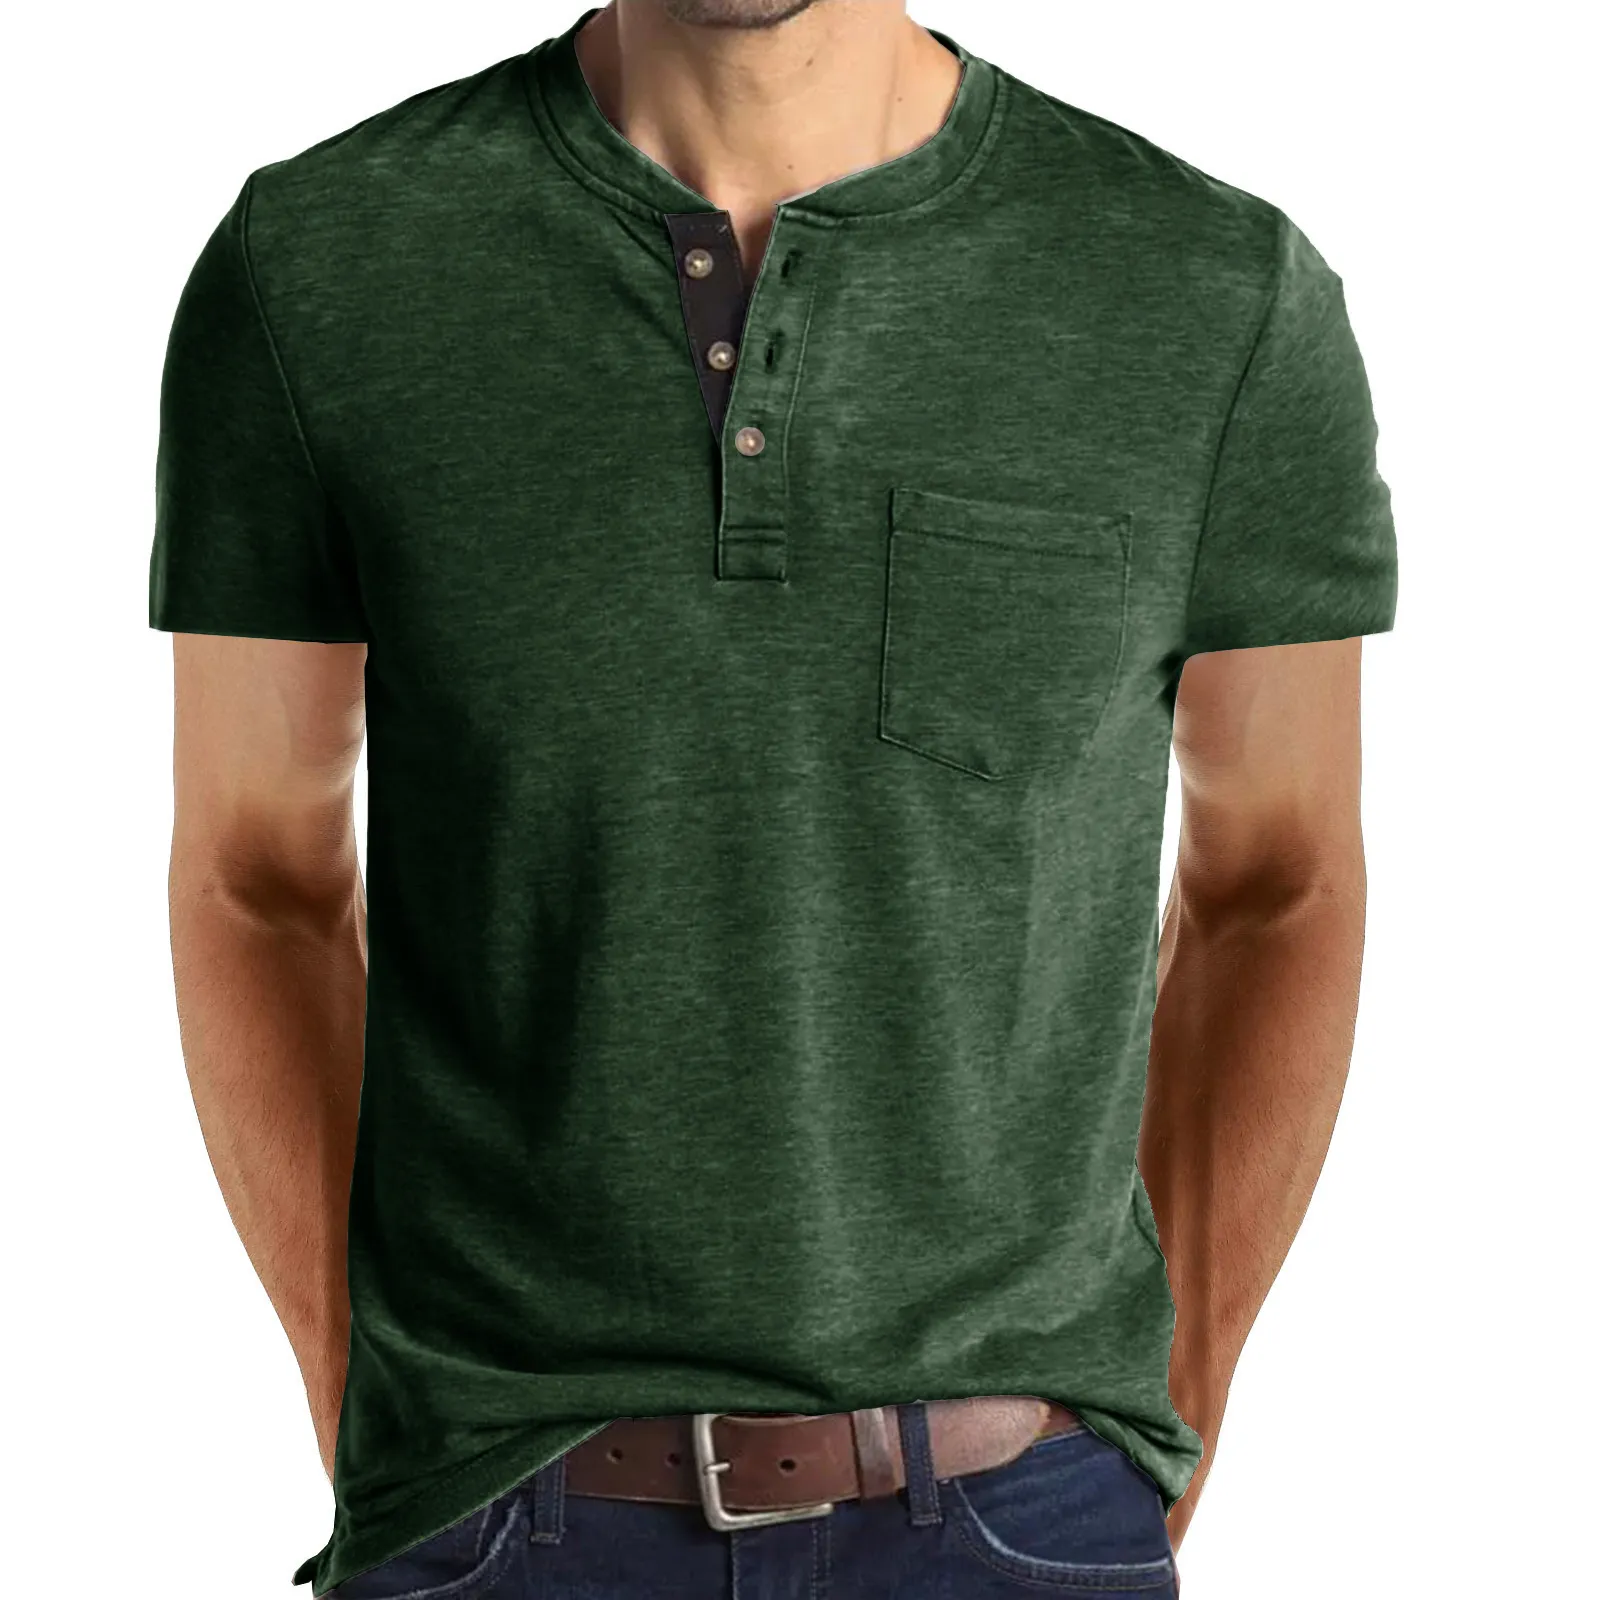 Mens TShirts Summer Henley Collar Short Sleeve Casual Tops Tee Fashion Solid Cotton T Shirt for Men 230411